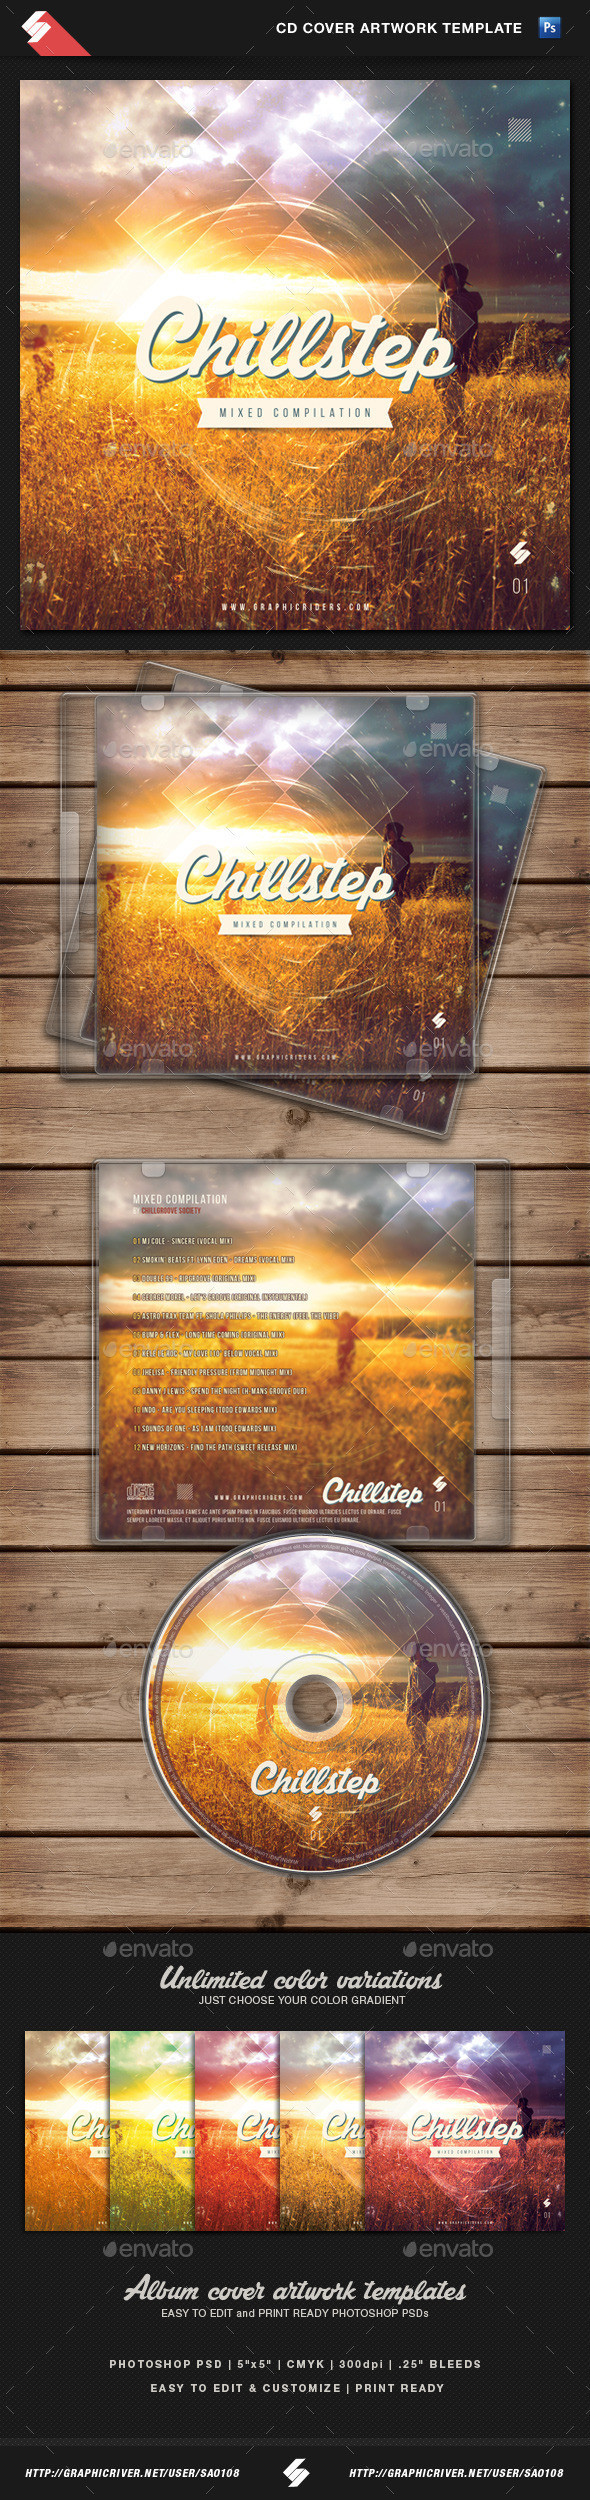 Chillstep cd cover template preview